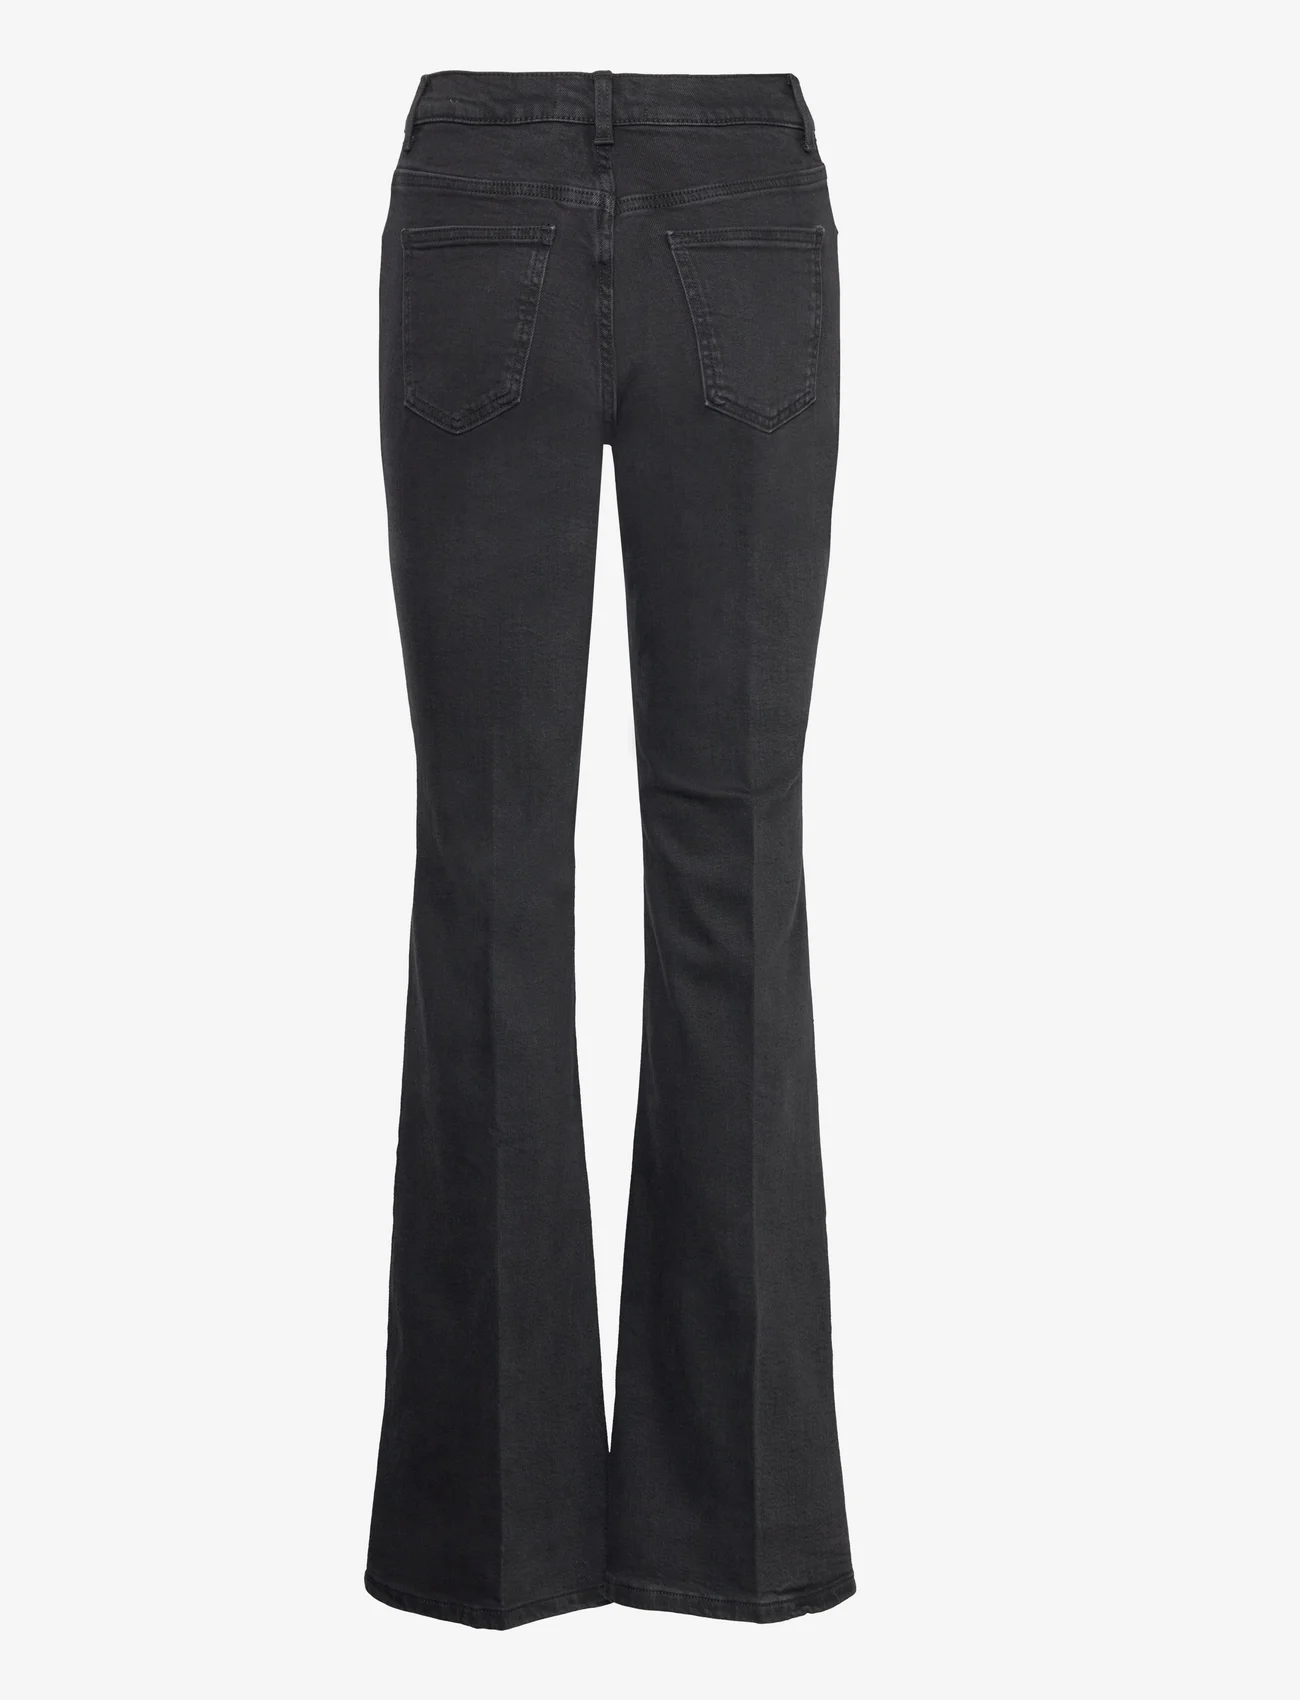 Mango - High-waist flared jeans - flared jeans - open grey - 1